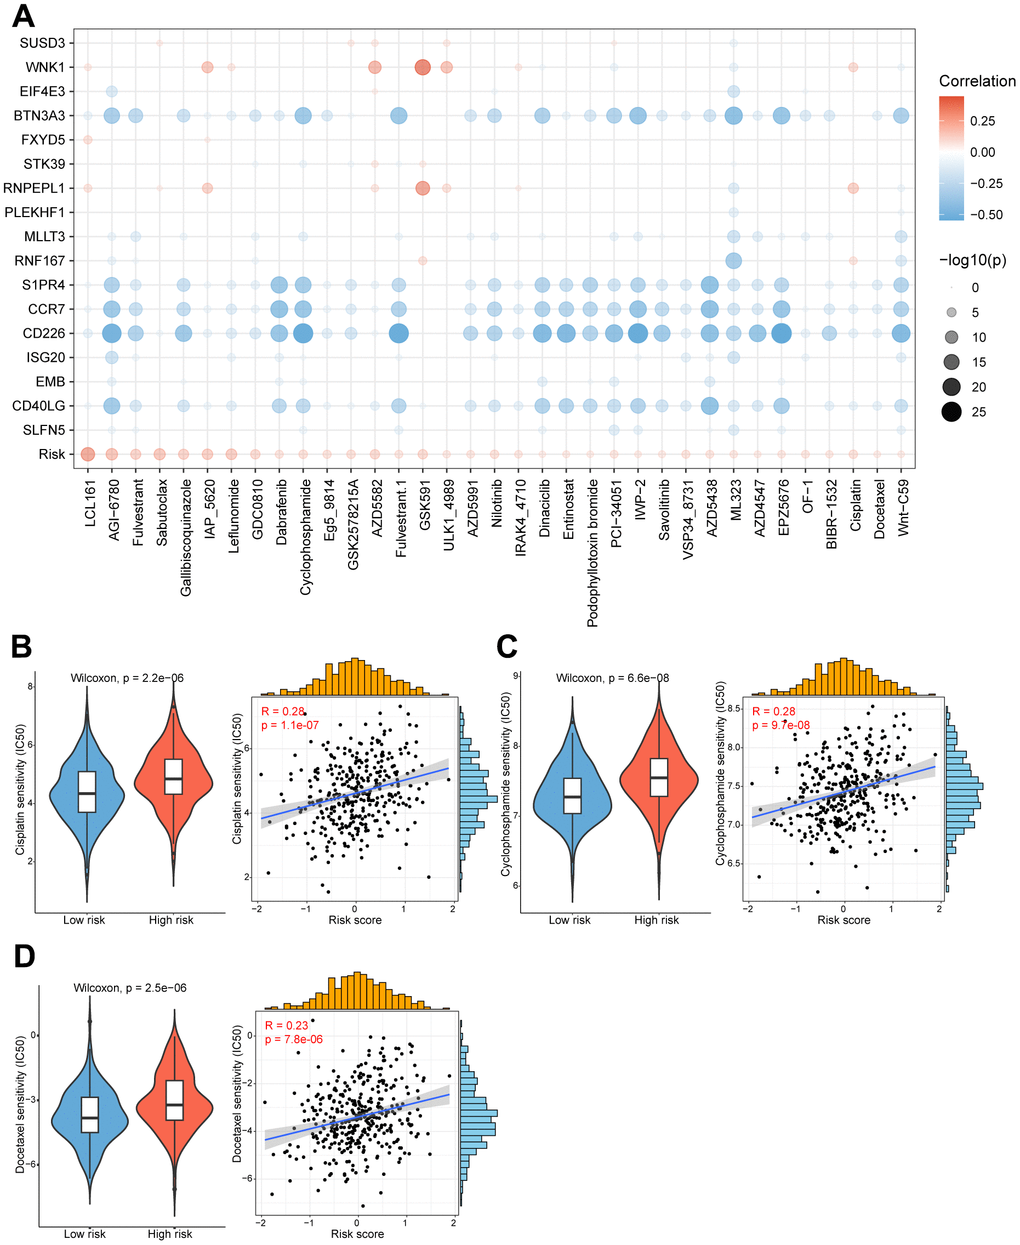 High/low-risk group patients differ in drug sensitivity and response to immunotherapy. (A) Bubble plot showing the relationship between drugs, risk score, and model genes. (B) Violin plot showing the comparison of IC50 of cisplatin between high/low-risk groups, and scatter plot showing the correlation between the IC50 of drugs and the risk score. (C) Violin plot showing the comparison of IC50 of cyclophosphamide between high/low-risk groups, and scatter plot showing the correlation between the IC50 of drugs and the risk score. (D) Violin plot showing the comparison of IC50 of docetaxel between high/low-risk groups, and scatter plot showing the correlation between the IC50 of drugs and the risk score.